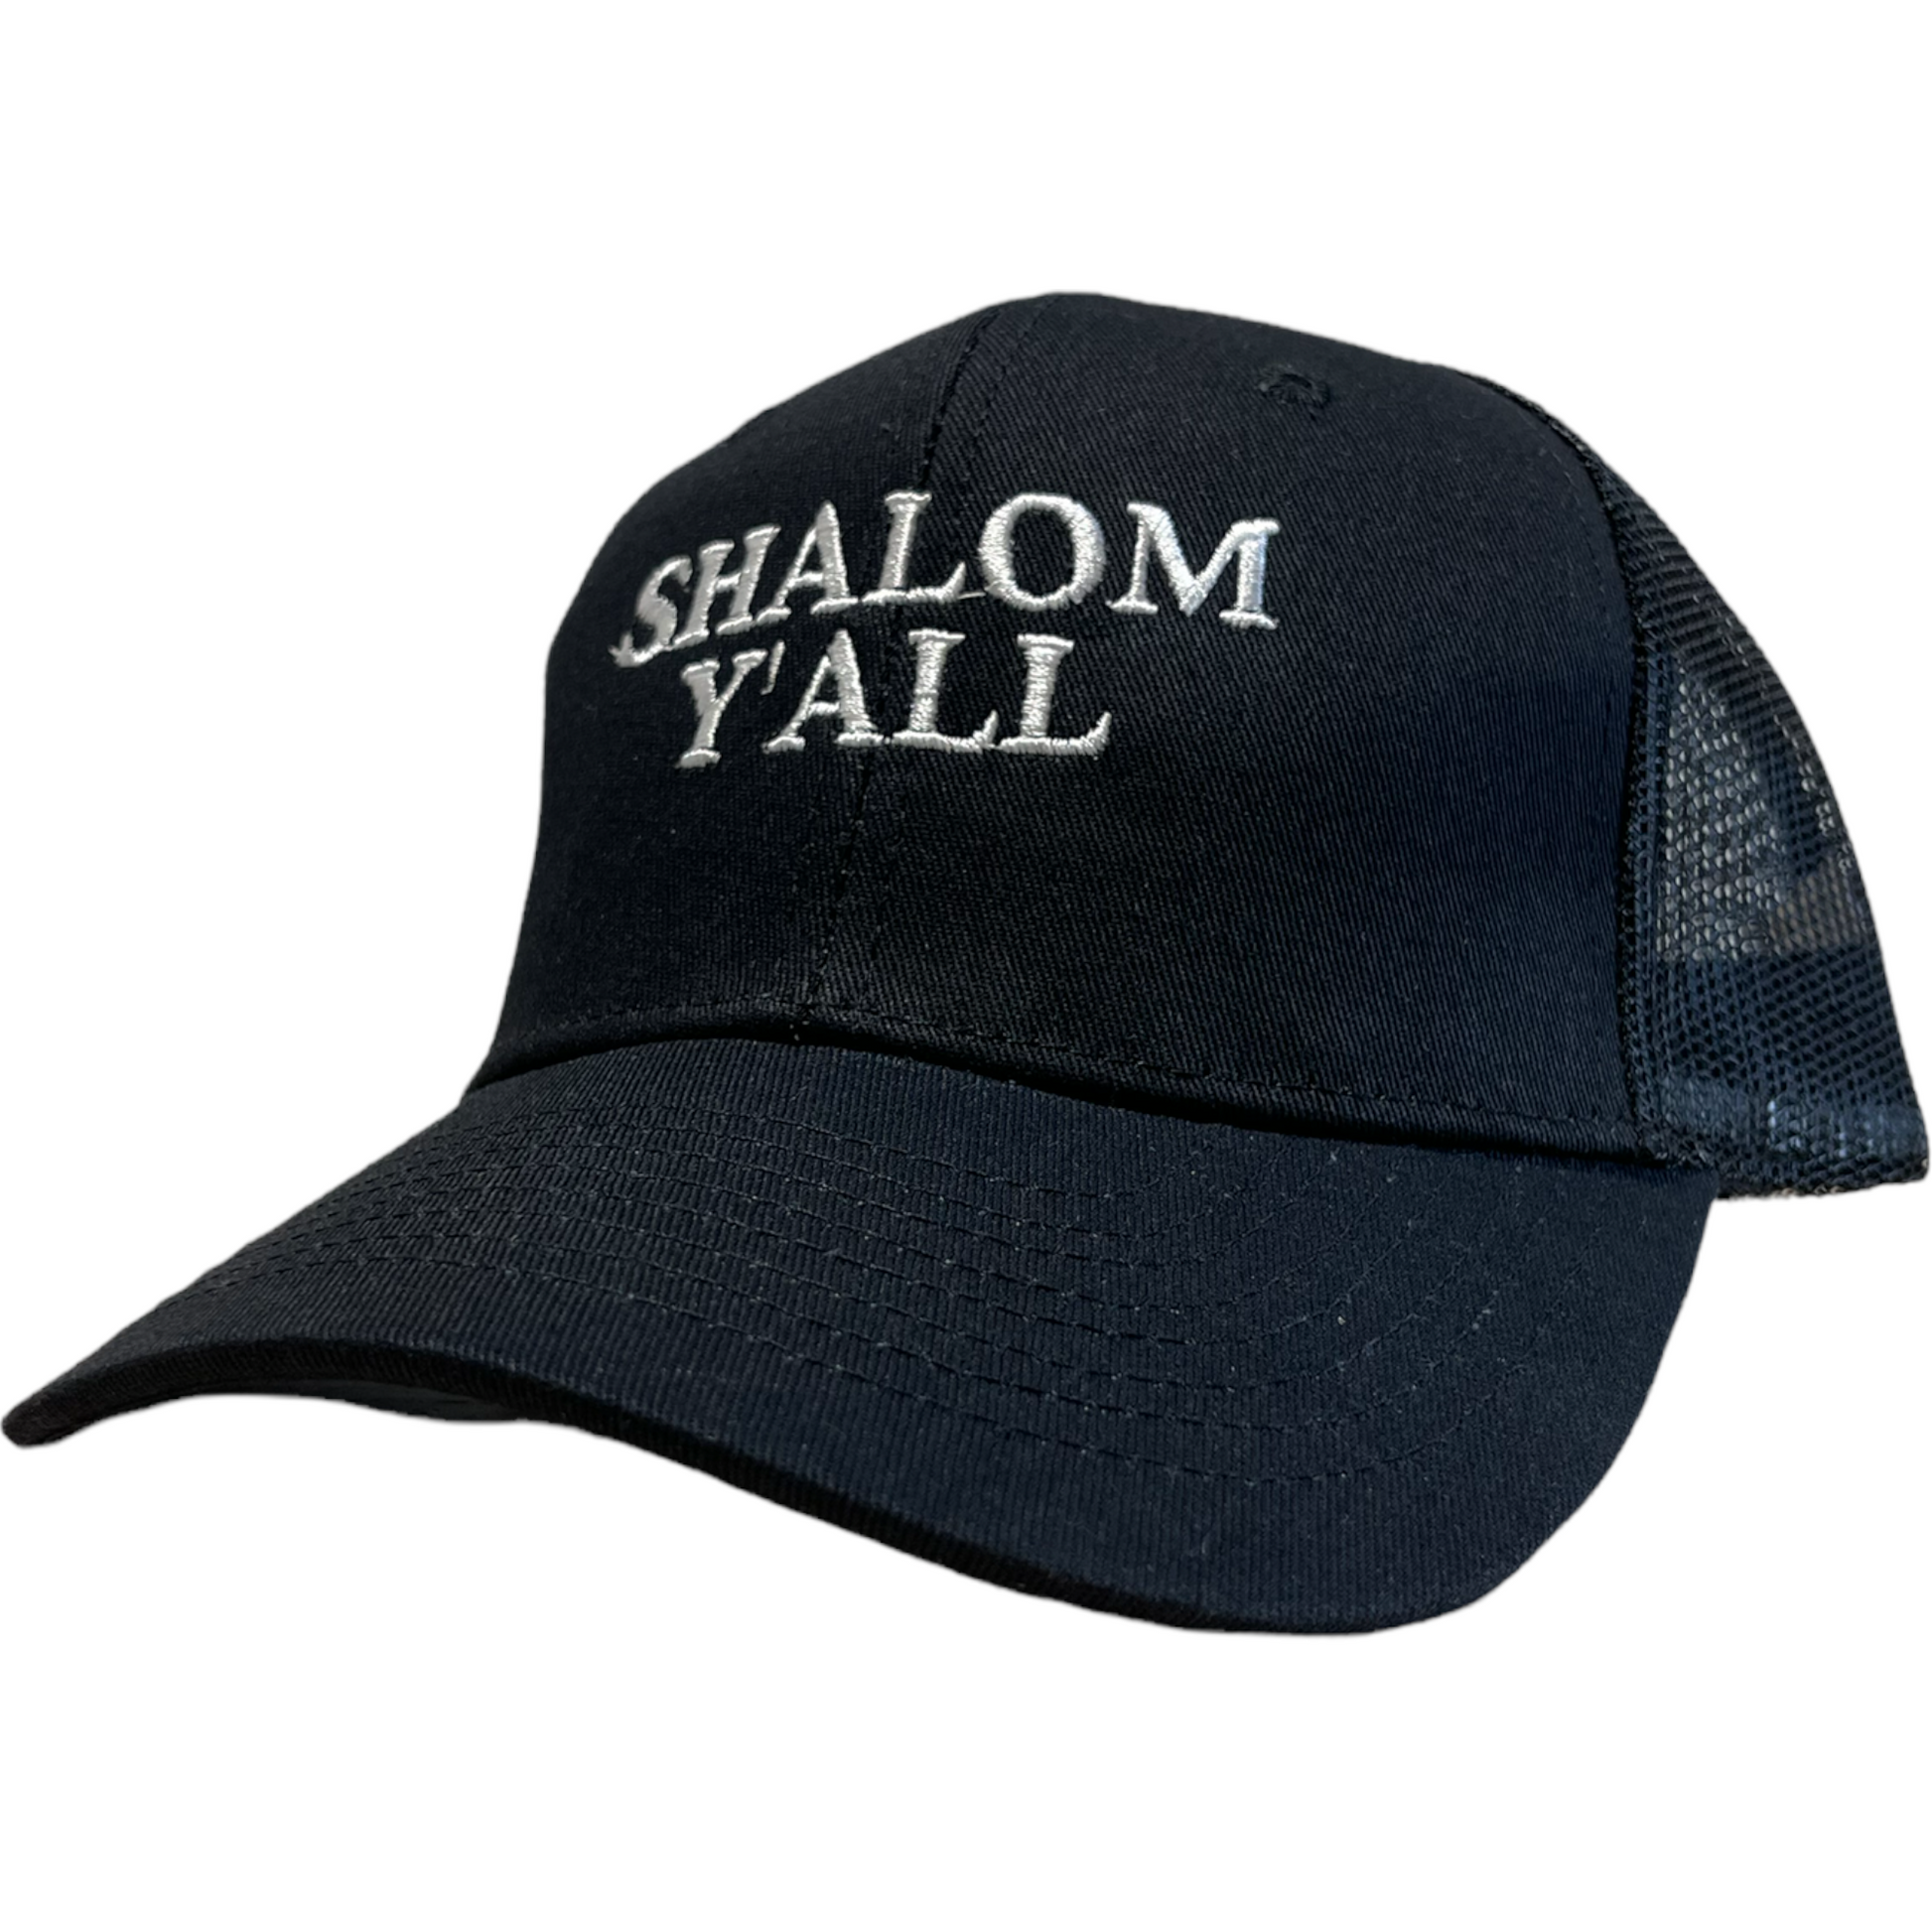 NEW SHALOM ISRAEL TOURS EMBROIDERED SOUVENIR ADJUSTABLE HATS & VISORS  LOT OF 4